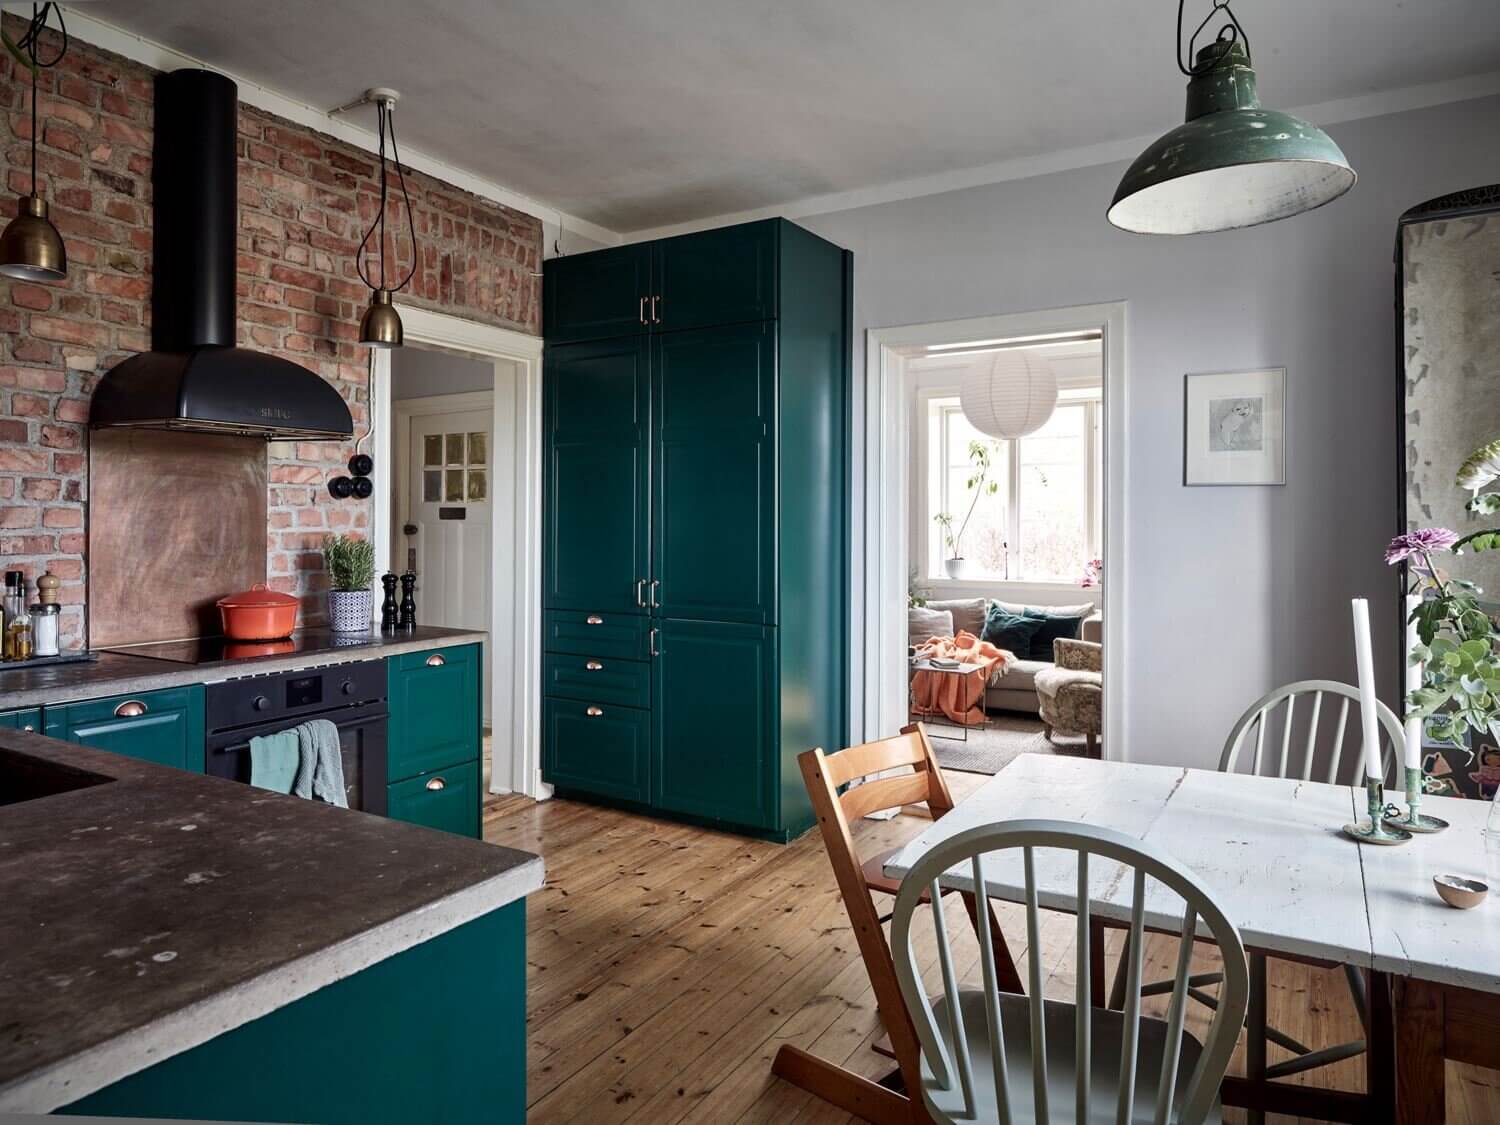 AGreenKitchenwithExposedBrickinaScandiApartment TheNordroom5 A Green Kitchen with Exposed Brick in a Scandi Apartment